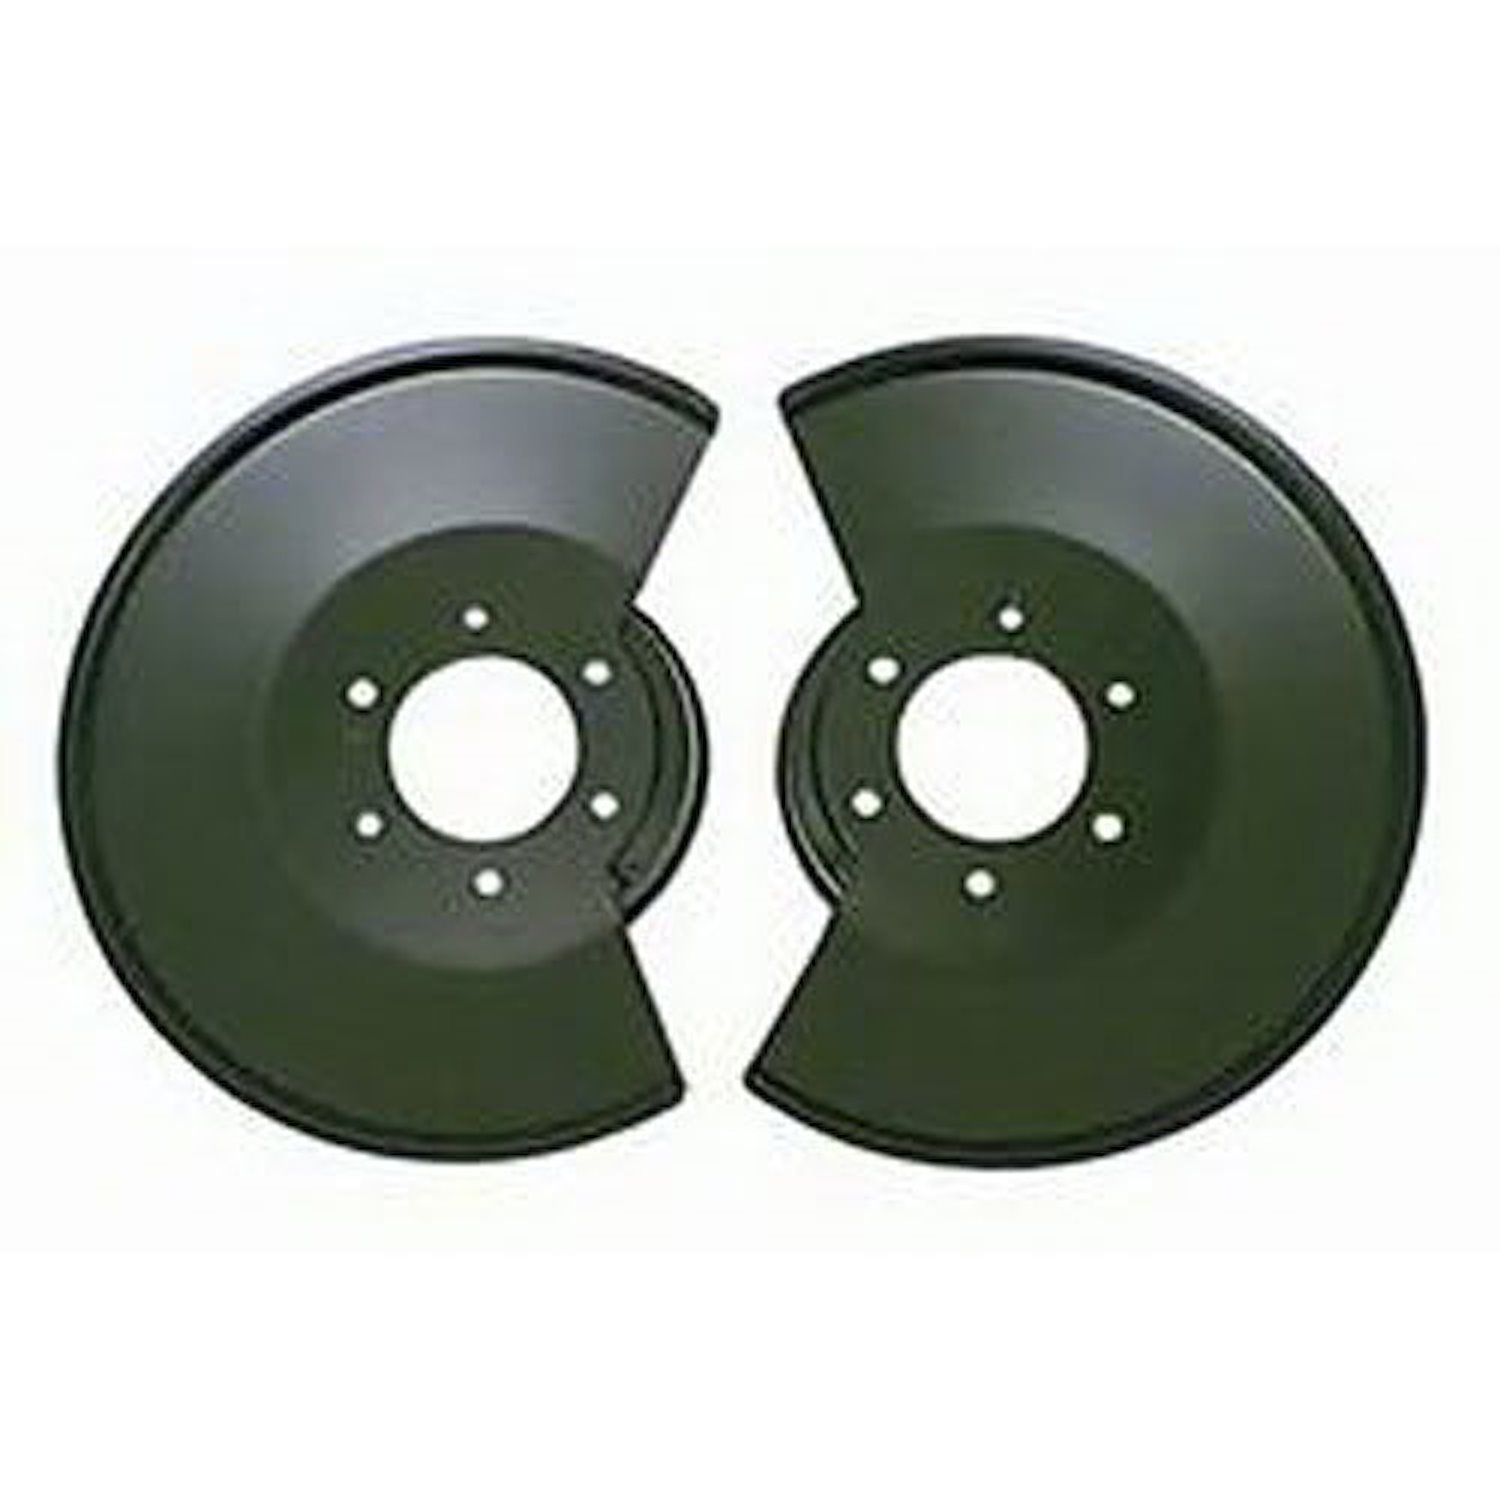 Pair of front disc brake dust shields are powder coated black and fit 78-83 Jeep CJ5 78-86 CJ7 and 8